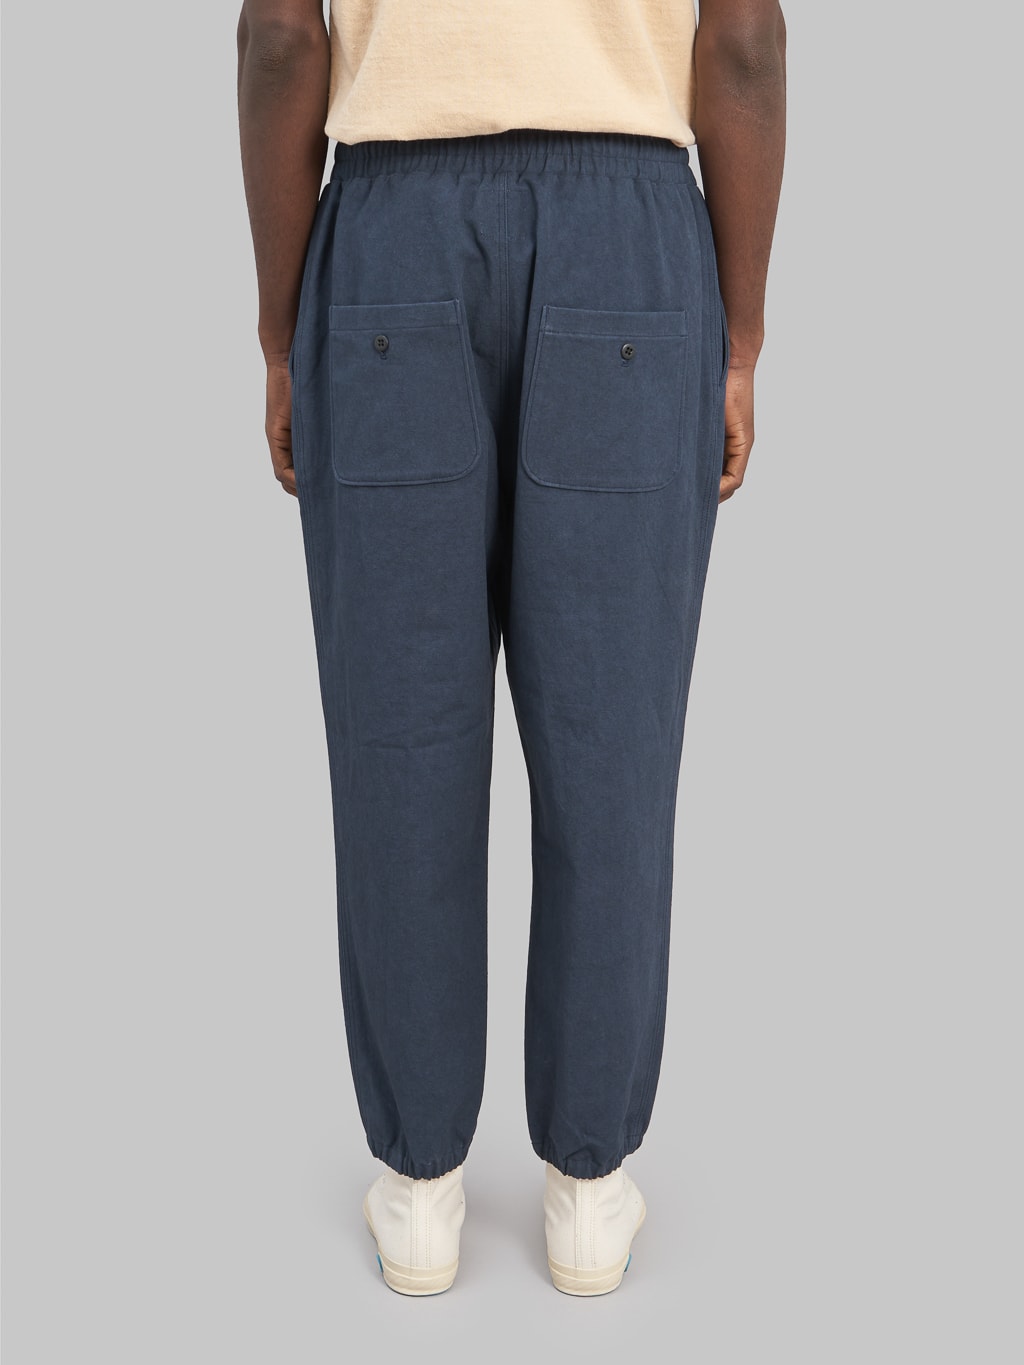 Jackman Canvas Rookie Pants Navy sulfur dyed back 